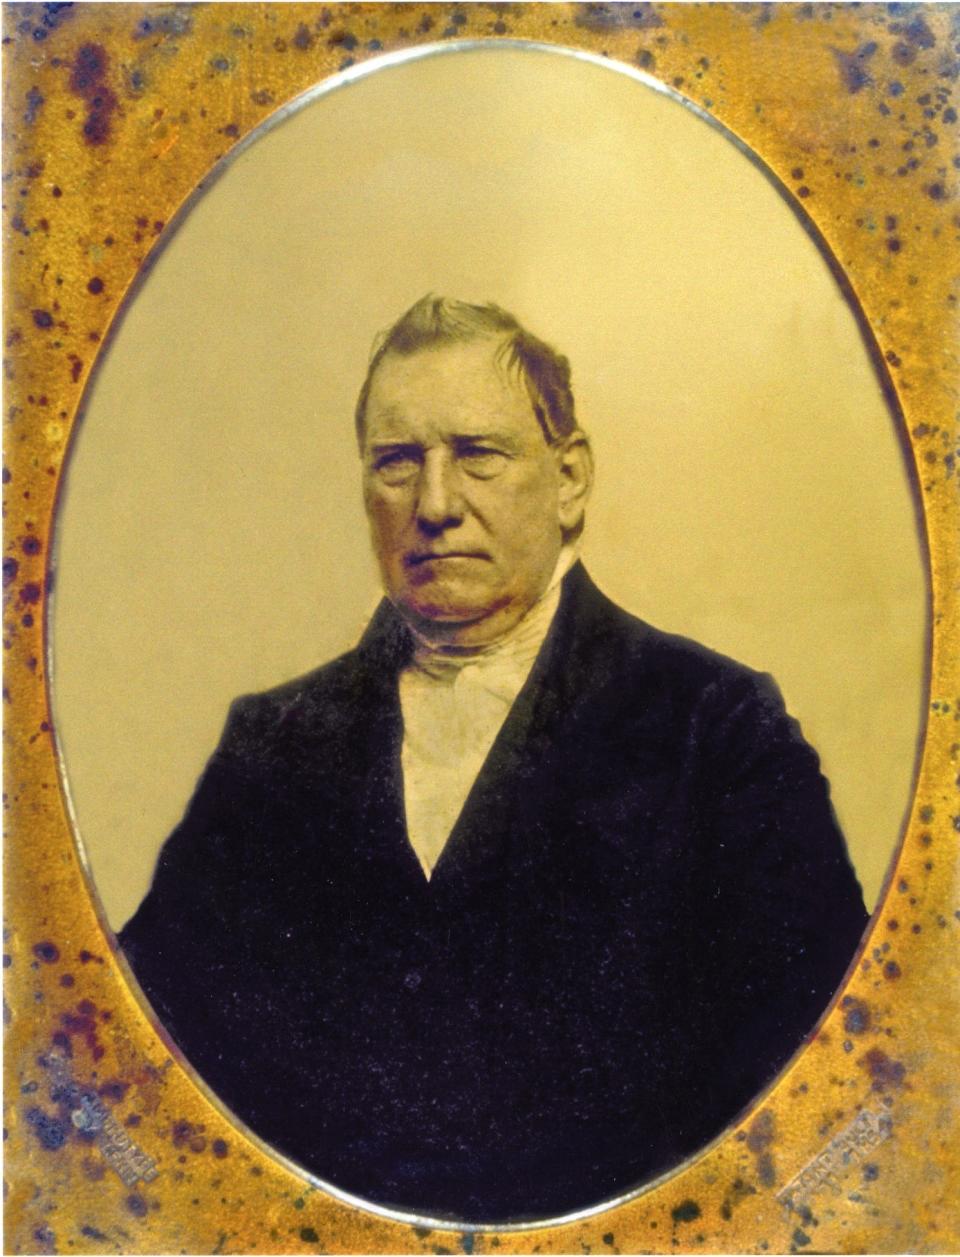 Charles McMicken donated the money and land that built the University of Cincinnati.